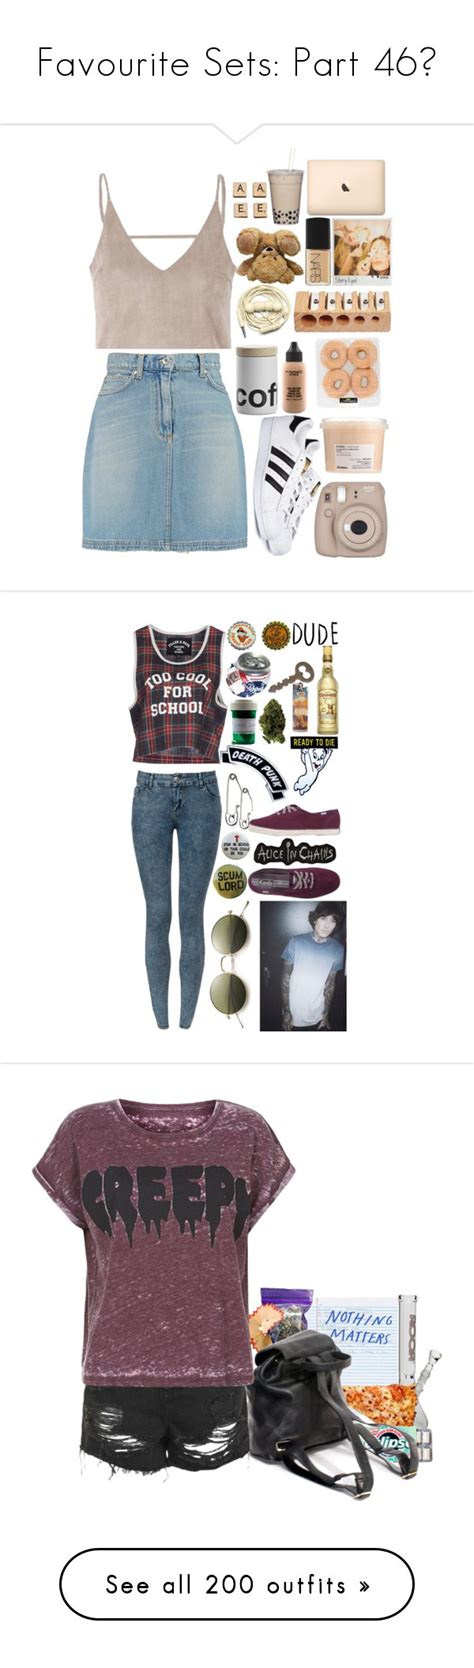 Favourite Sets Part 46 By Nattiexo Liked On Polyvore Featuring Msgm